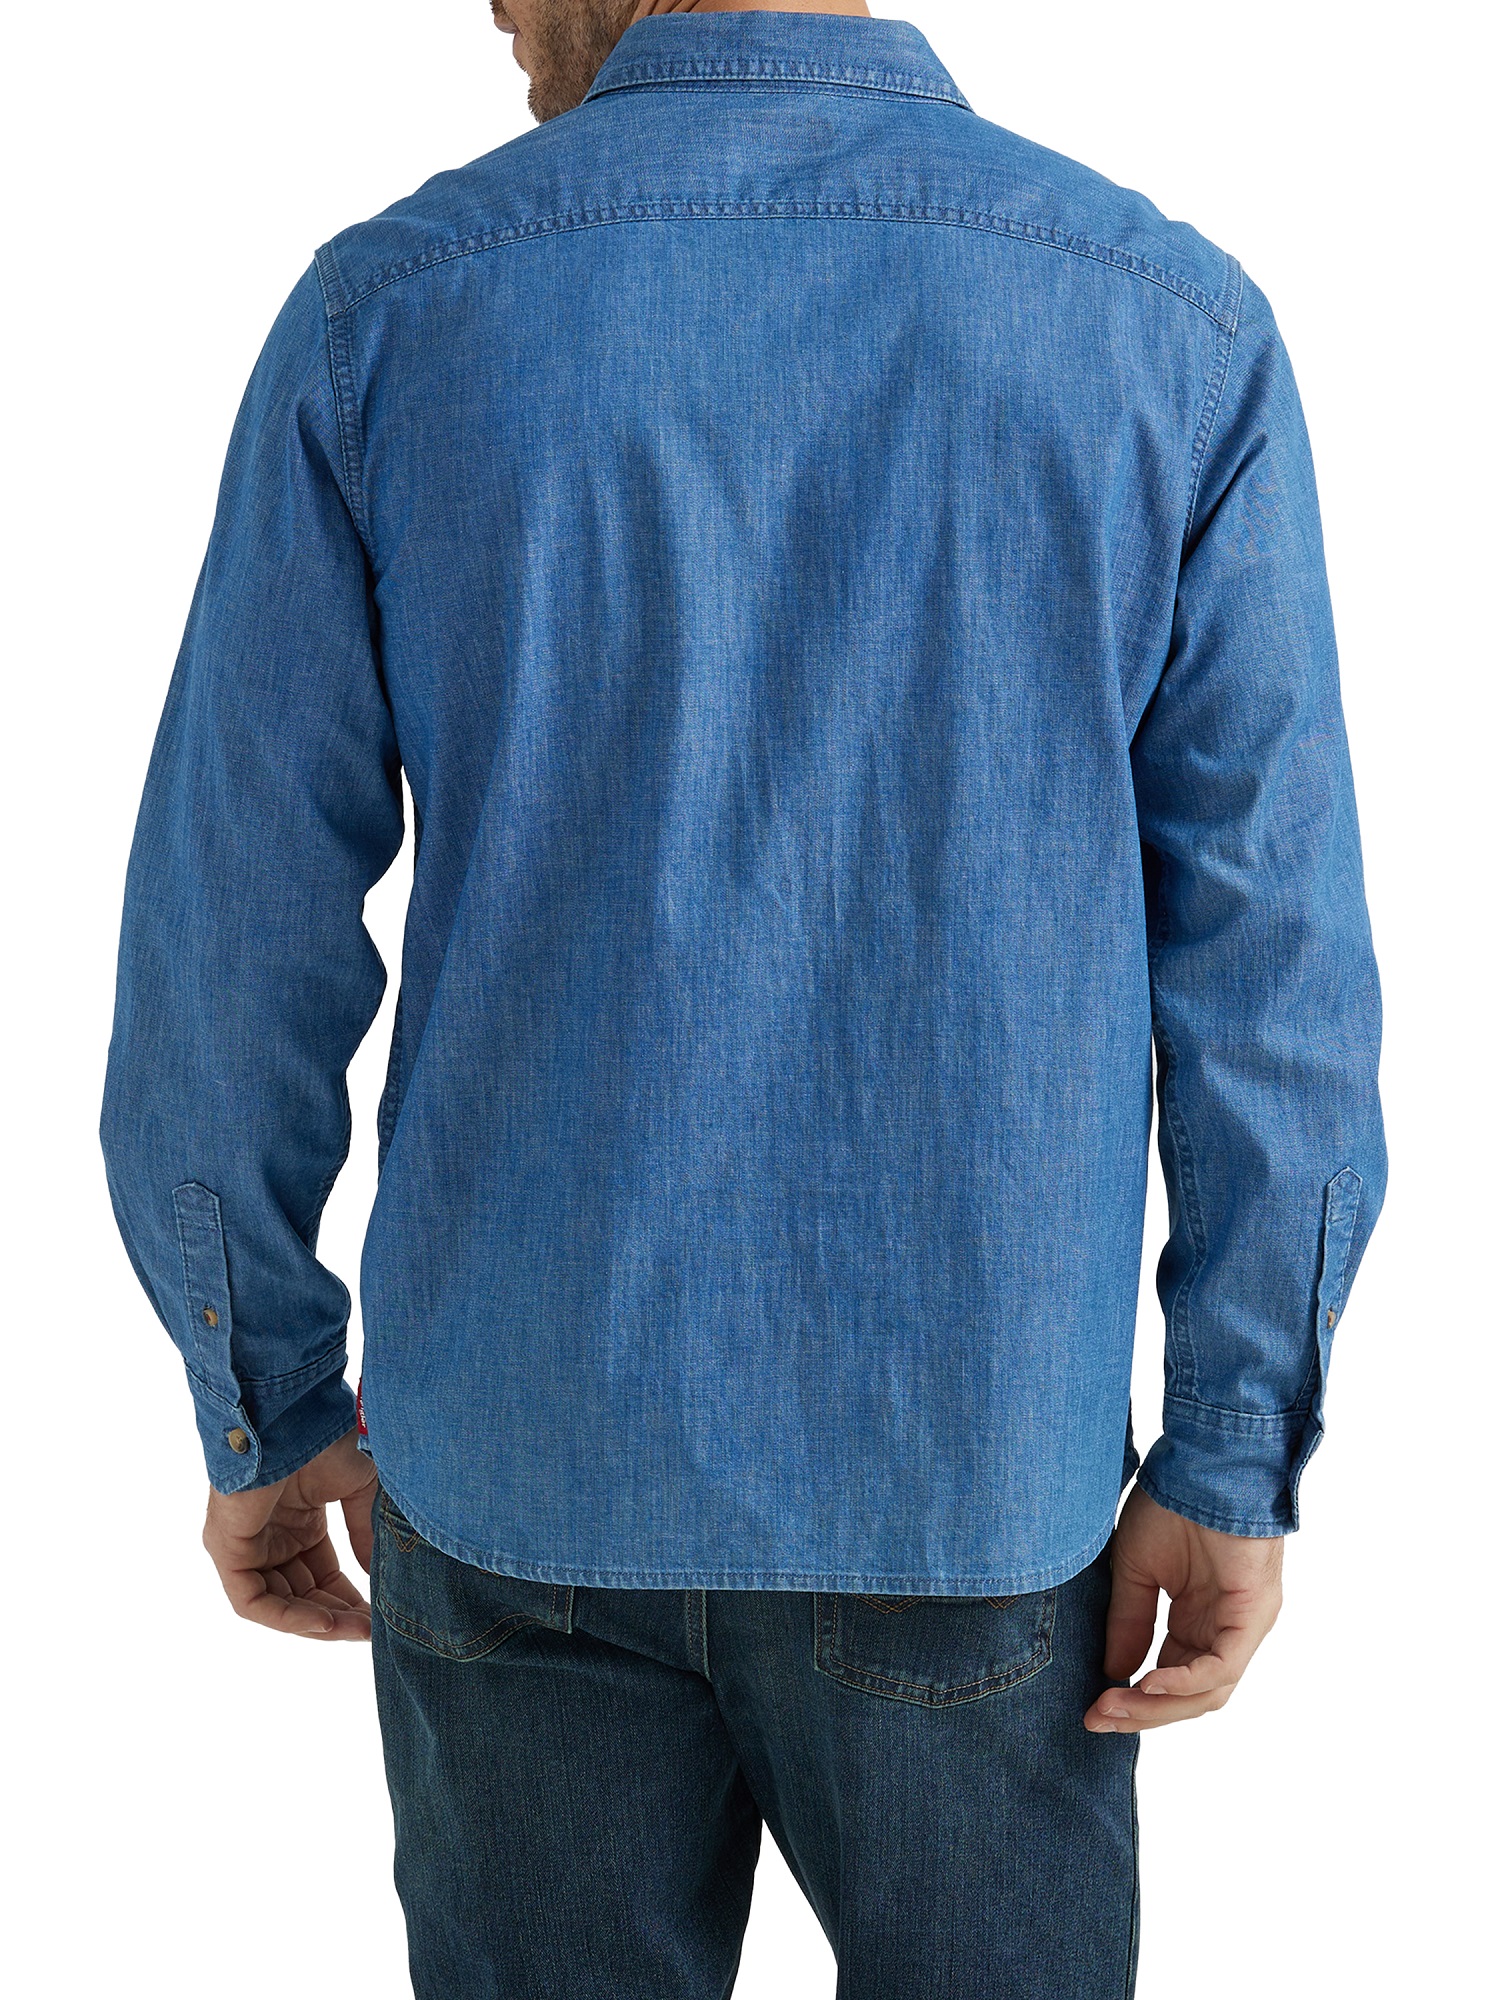 Wrangler® Men's and Big Men's Relaxed Fit Long Sleeve Woven Shirt, Sizes S-5XL - image 3 of 4